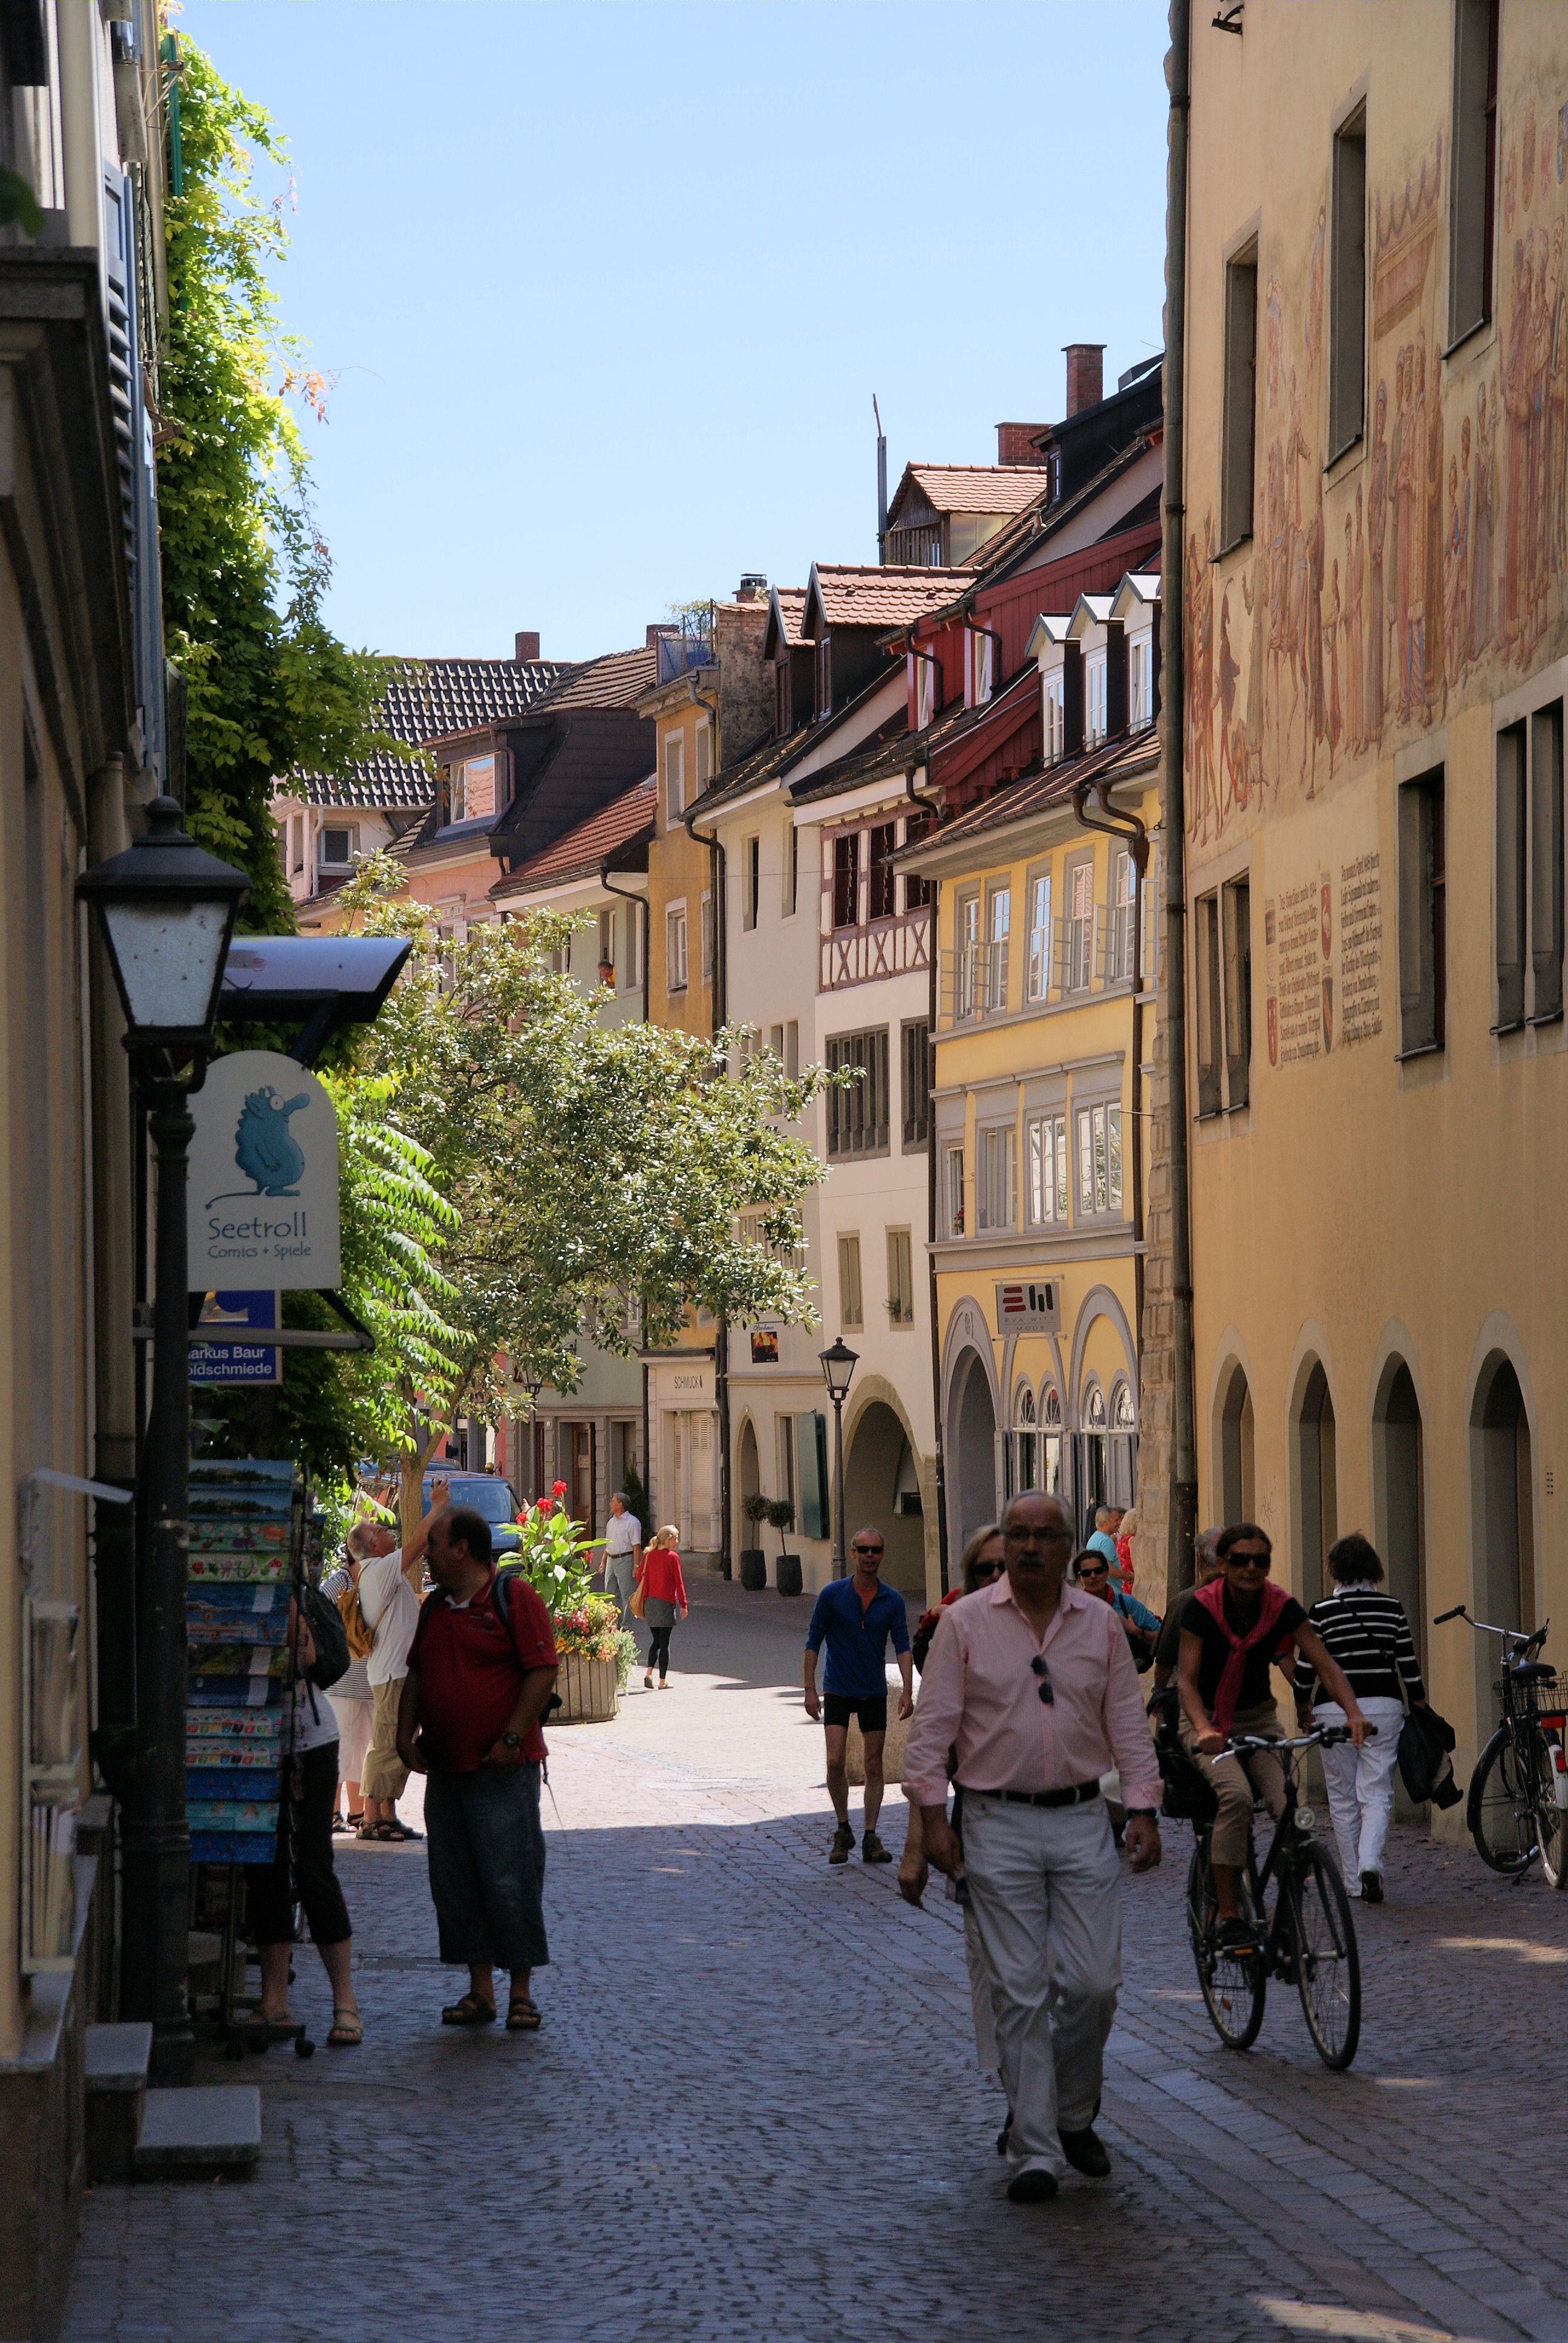 Zollernstraße (Konstanz) 5 -- By Johanning (Own work) [CC BY-SA 3.0 (http://creativecommons.org/licenses/by-sa/3.0)], via Wikimedia Commons